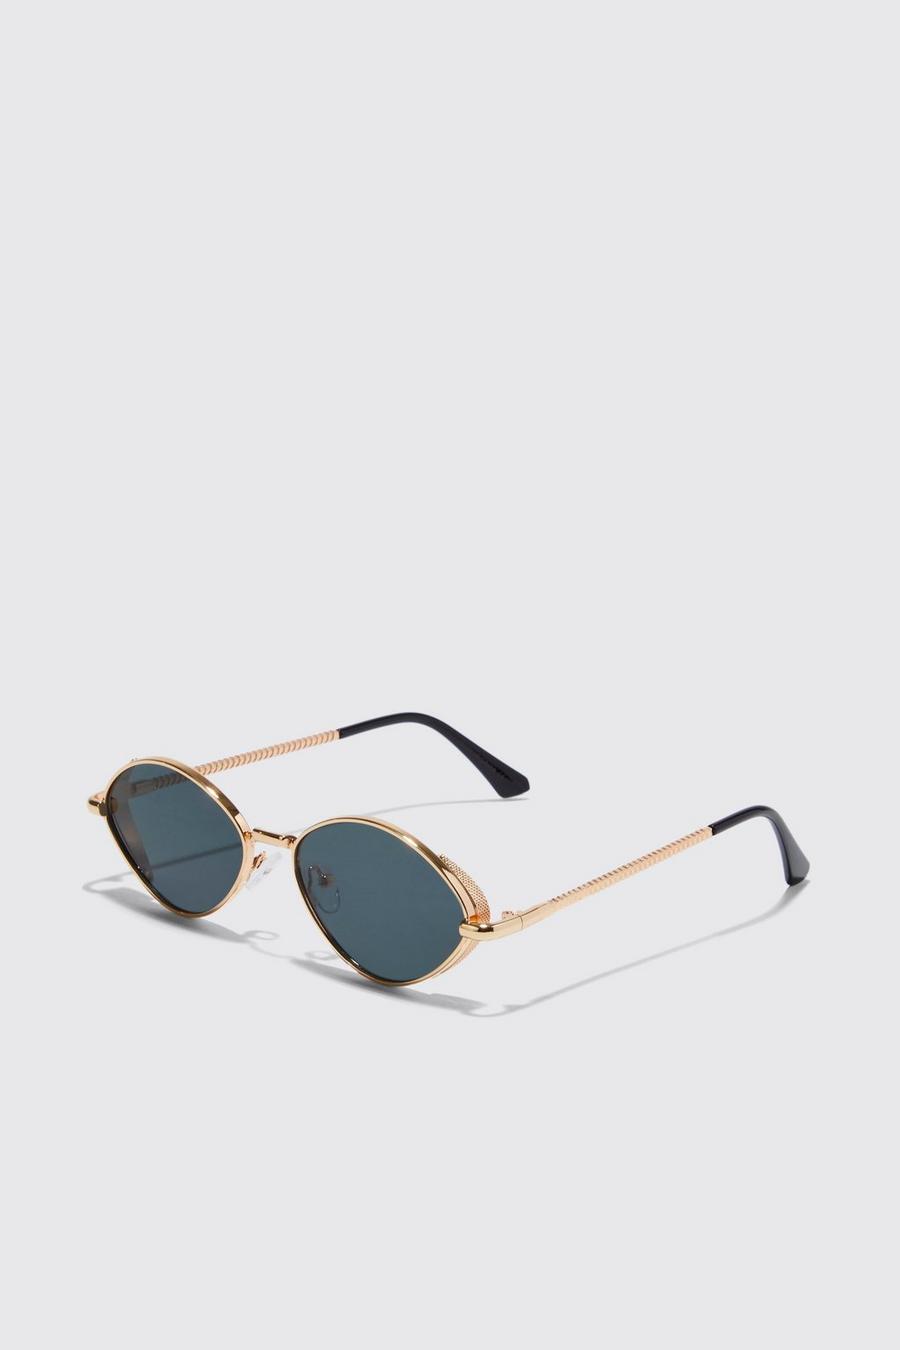 Gold Oval Lens Retro Sunglasses image number 1